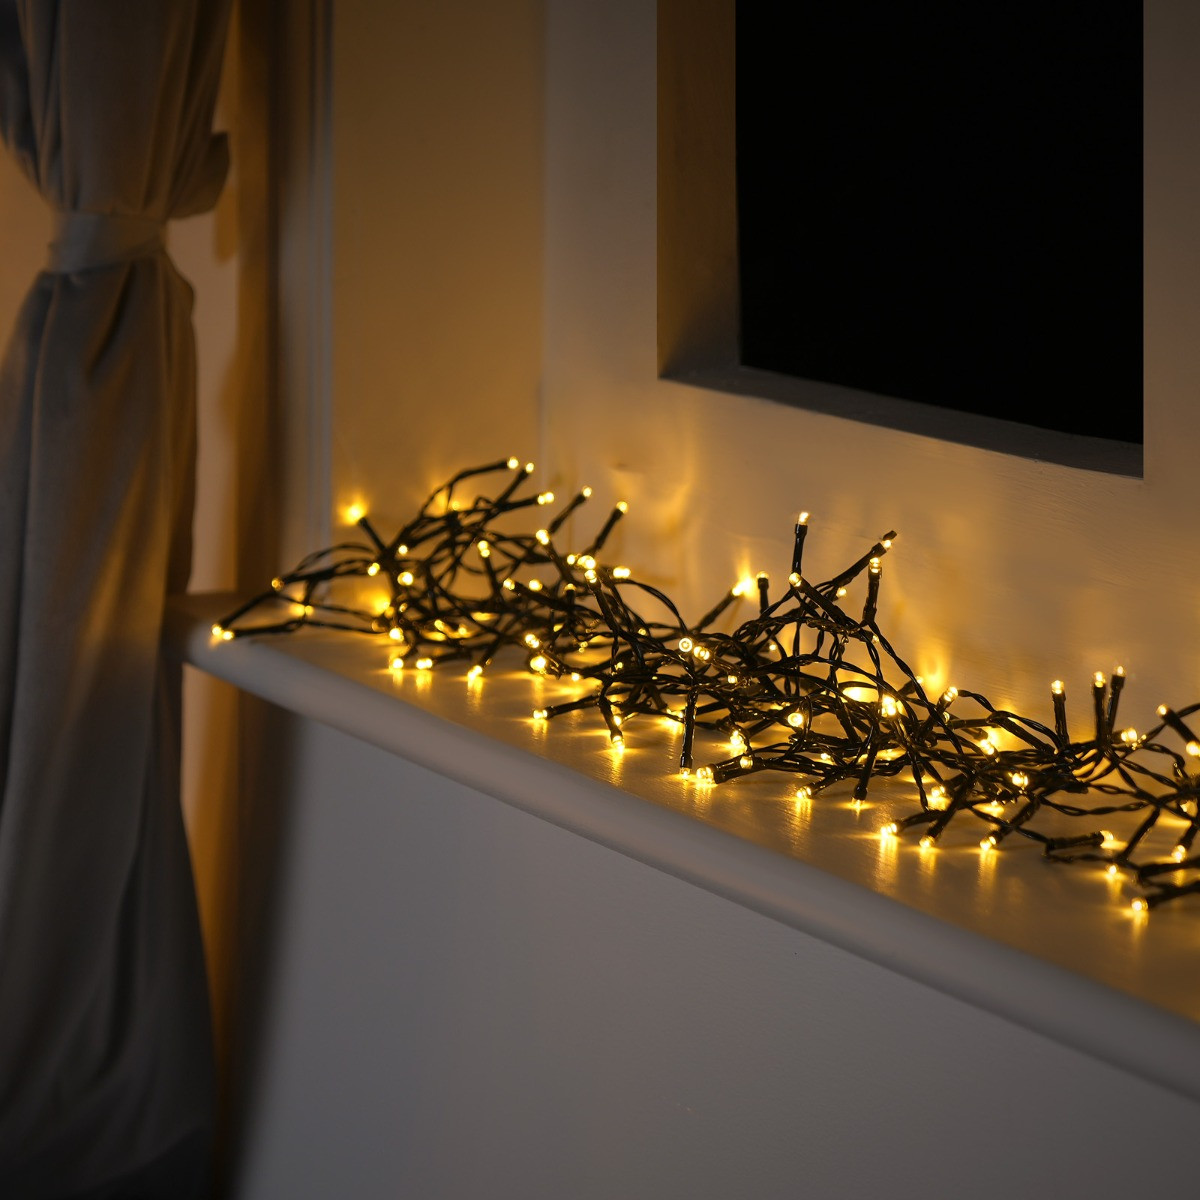 200 Indoor/Outdoor Battery Operated LED String Lights - Warm White>